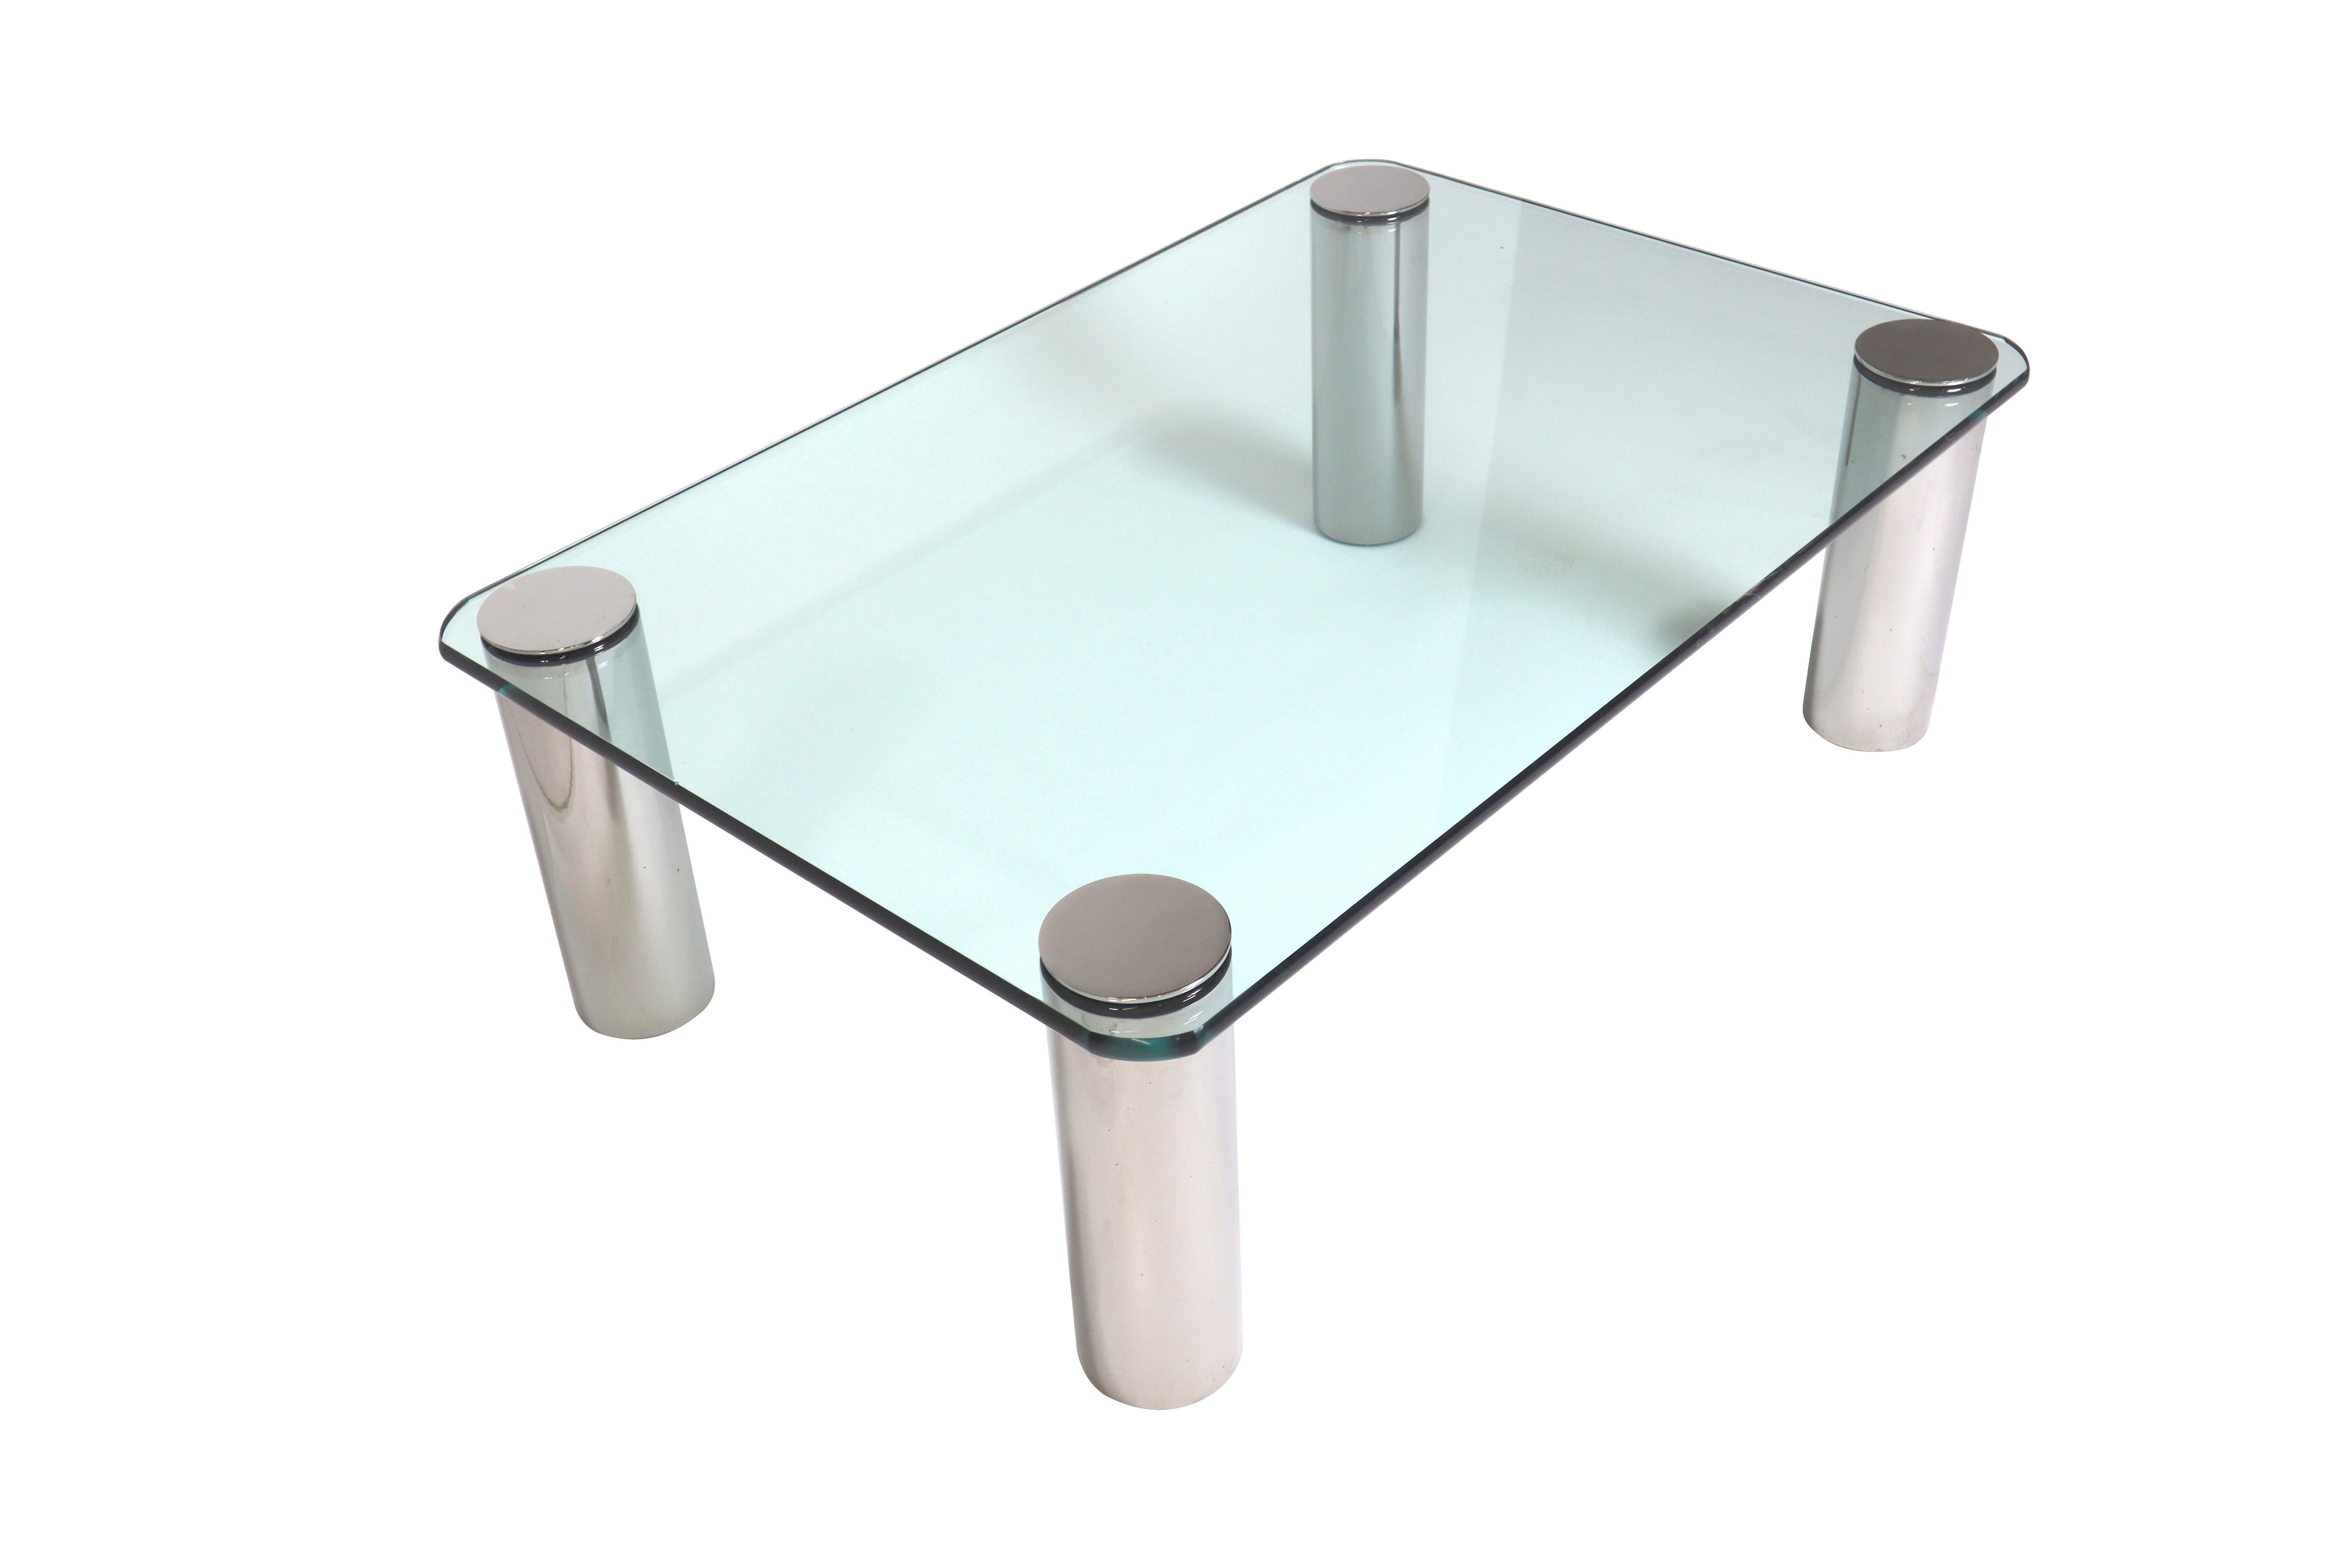 Chrome and glass cocktail table designed by Leon Rosen for Pace.